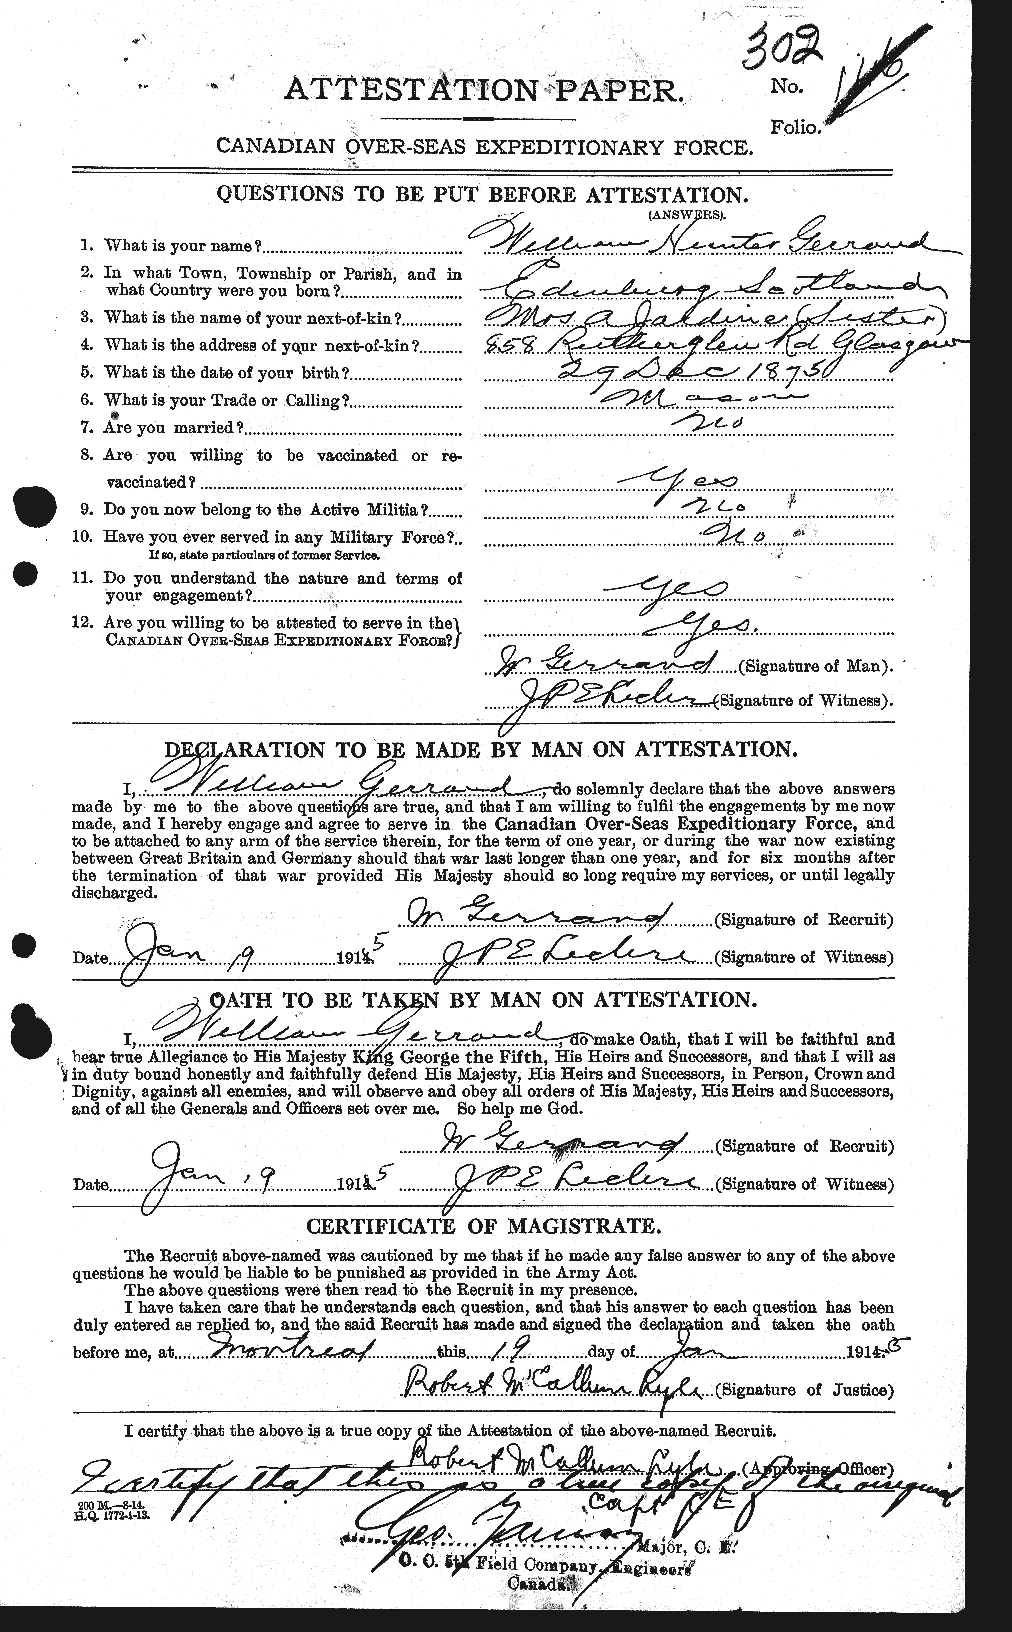 Personnel Records of the First World War - CEF 344233a